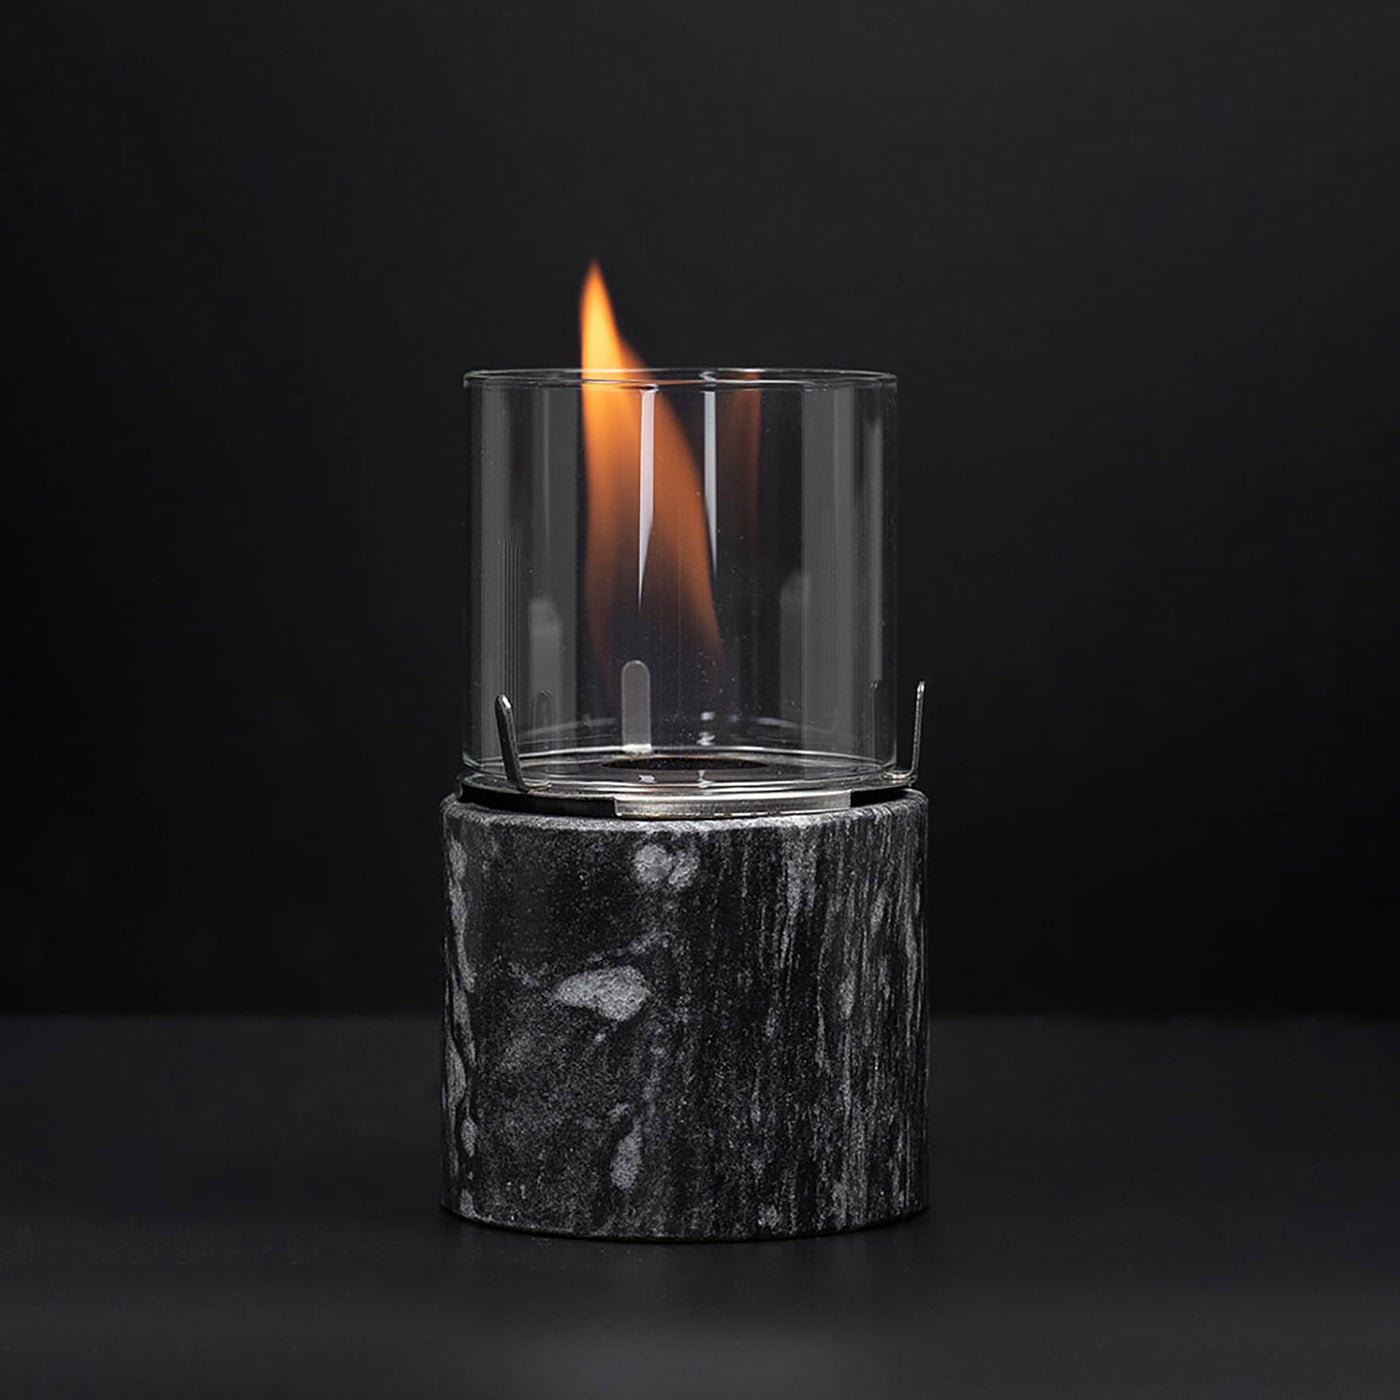 CLIMAQUA Flames Tabletop PINO S black marble